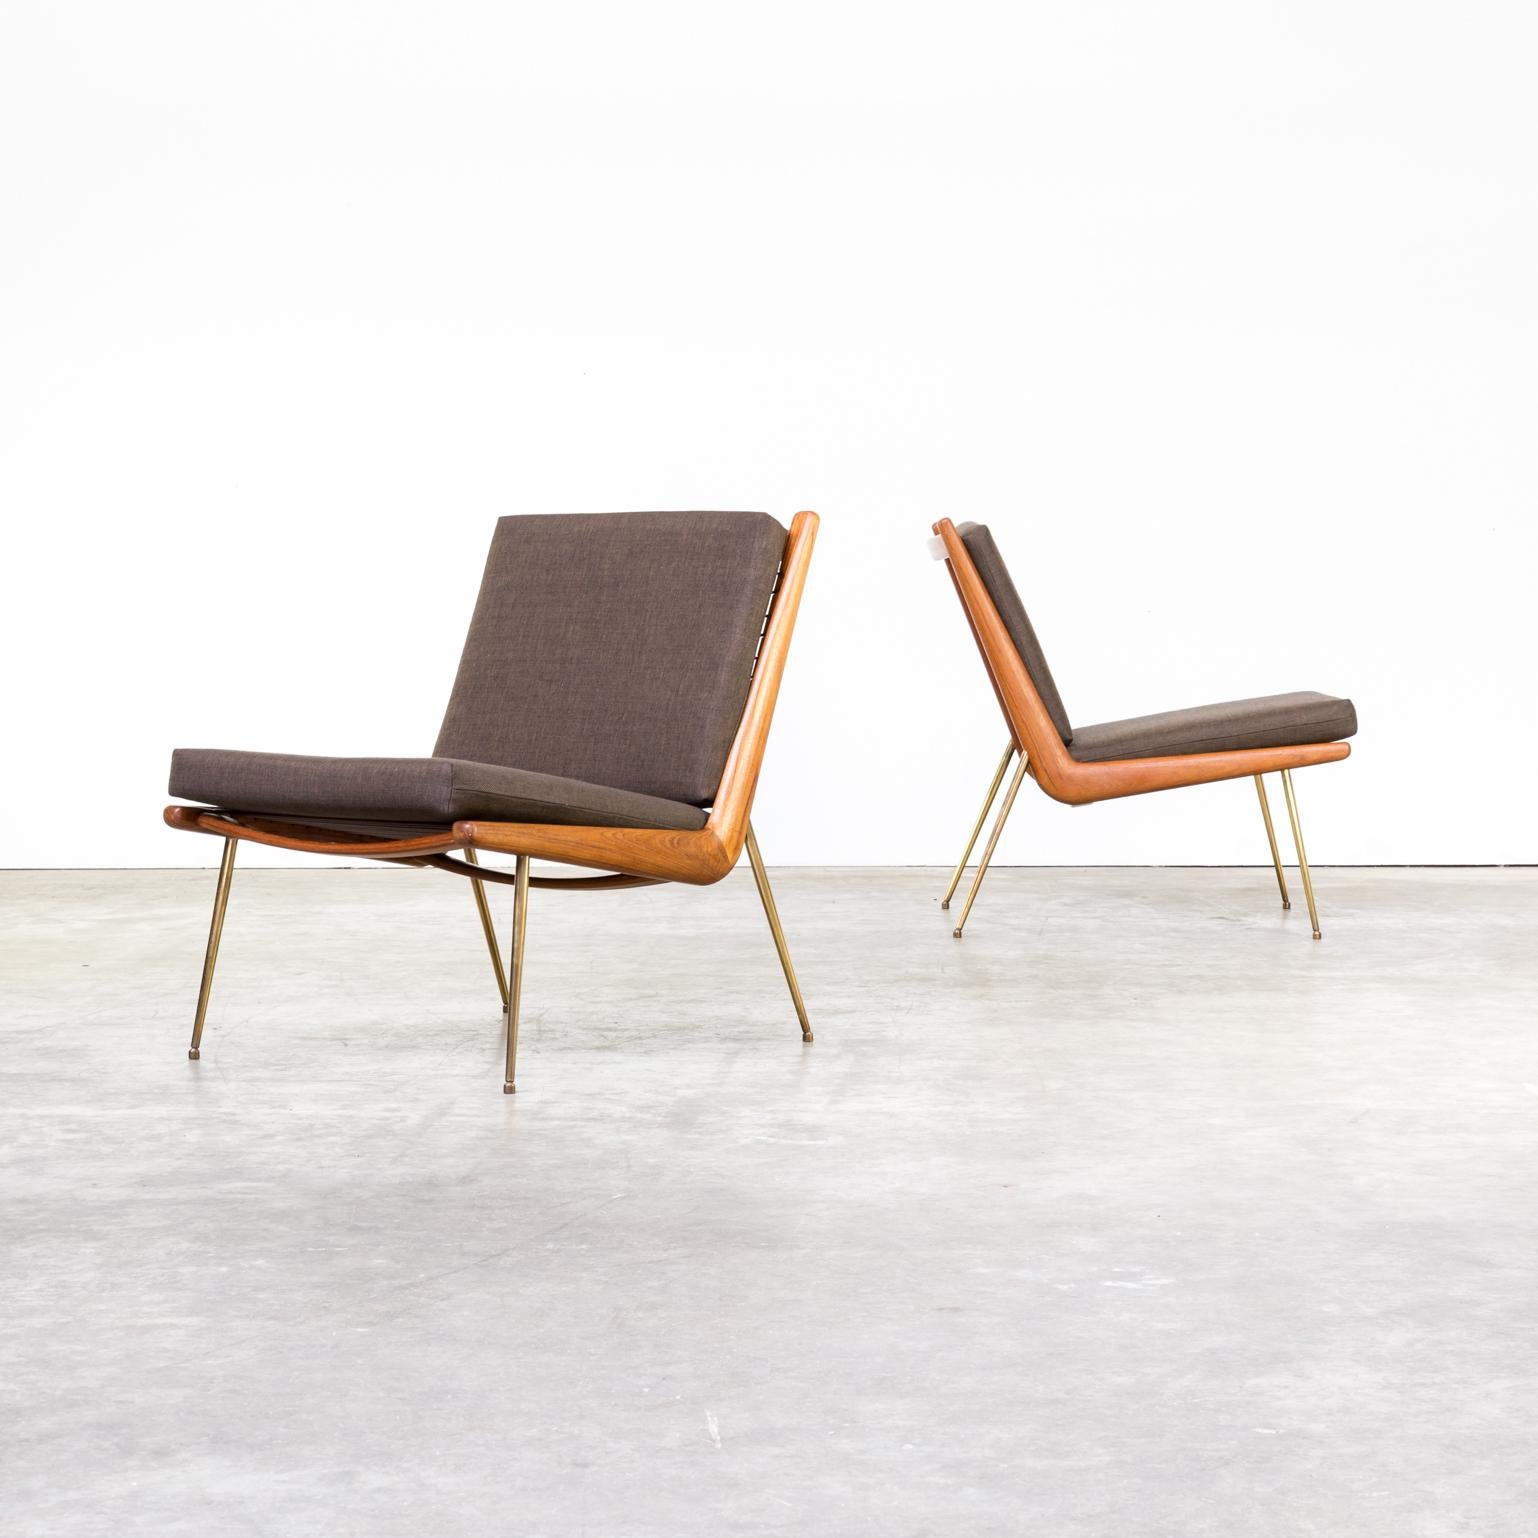 1960s Peter Hvidt and Orla Mølgaard-Nielsen ‘Boomerang’ chair FD 135 for France & Son, set of two.